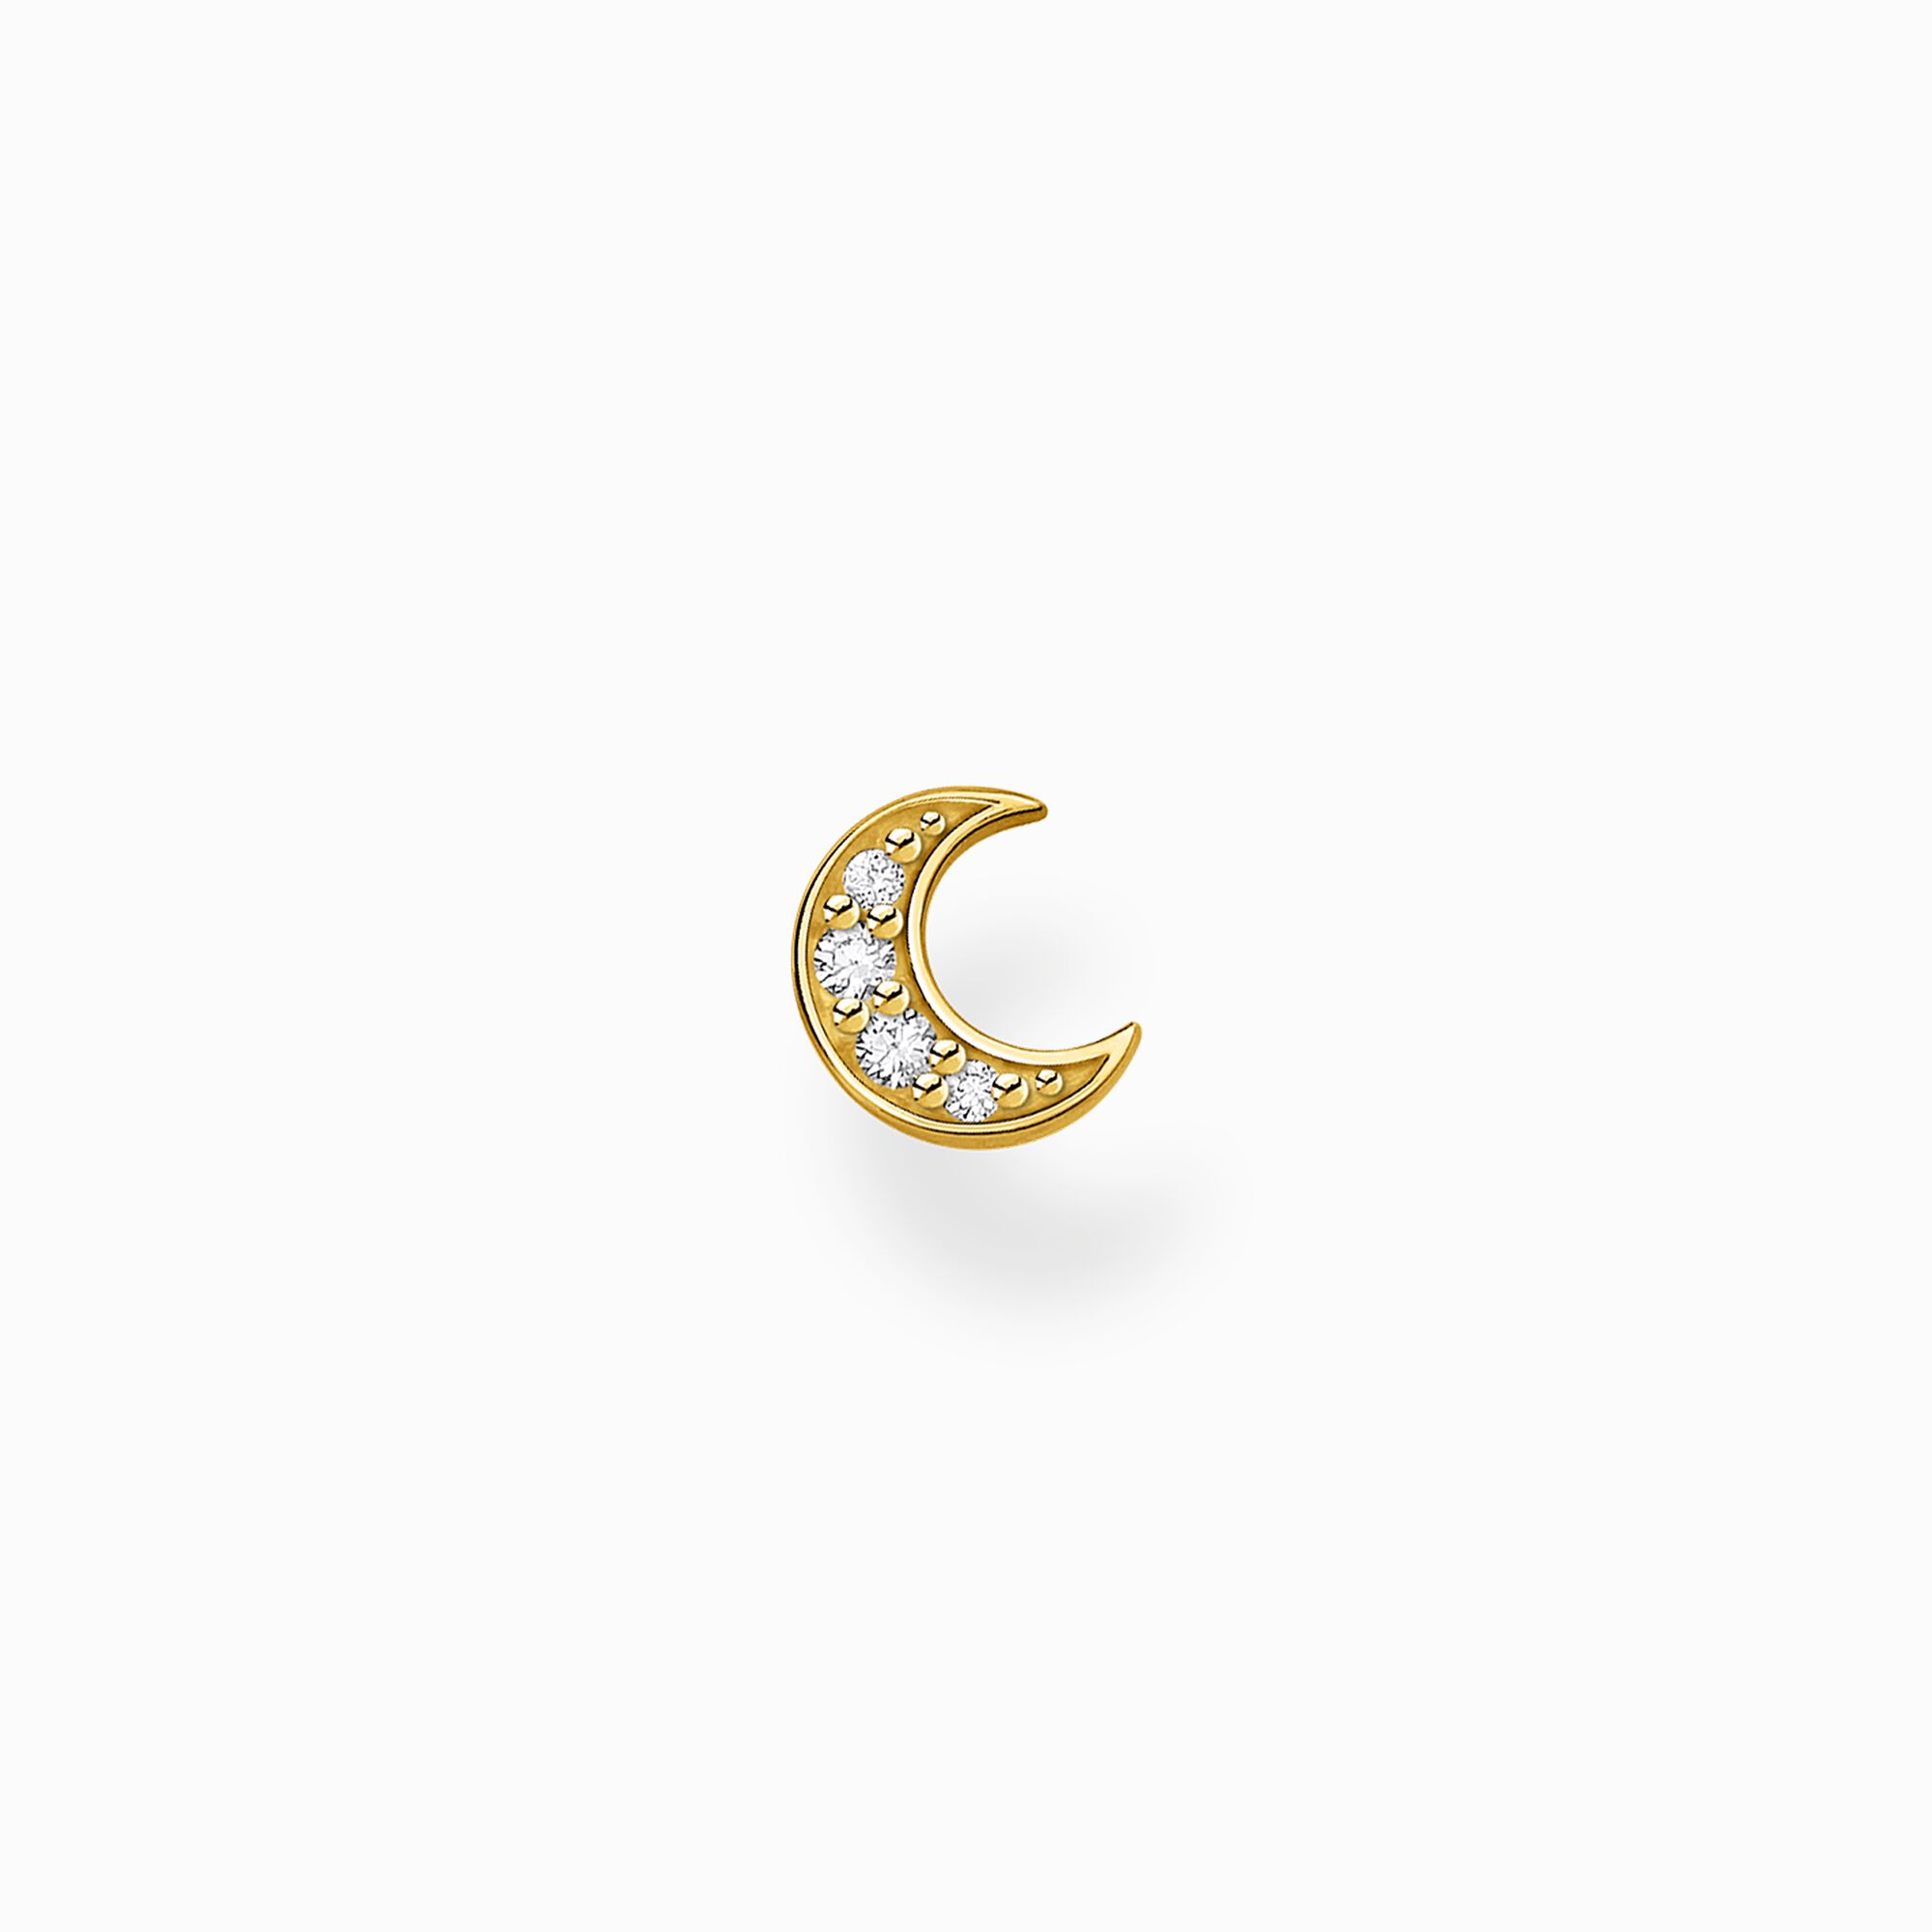 Single ear stud moon pav&eacute; gold from the Charming Collection collection in the THOMAS SABO online store